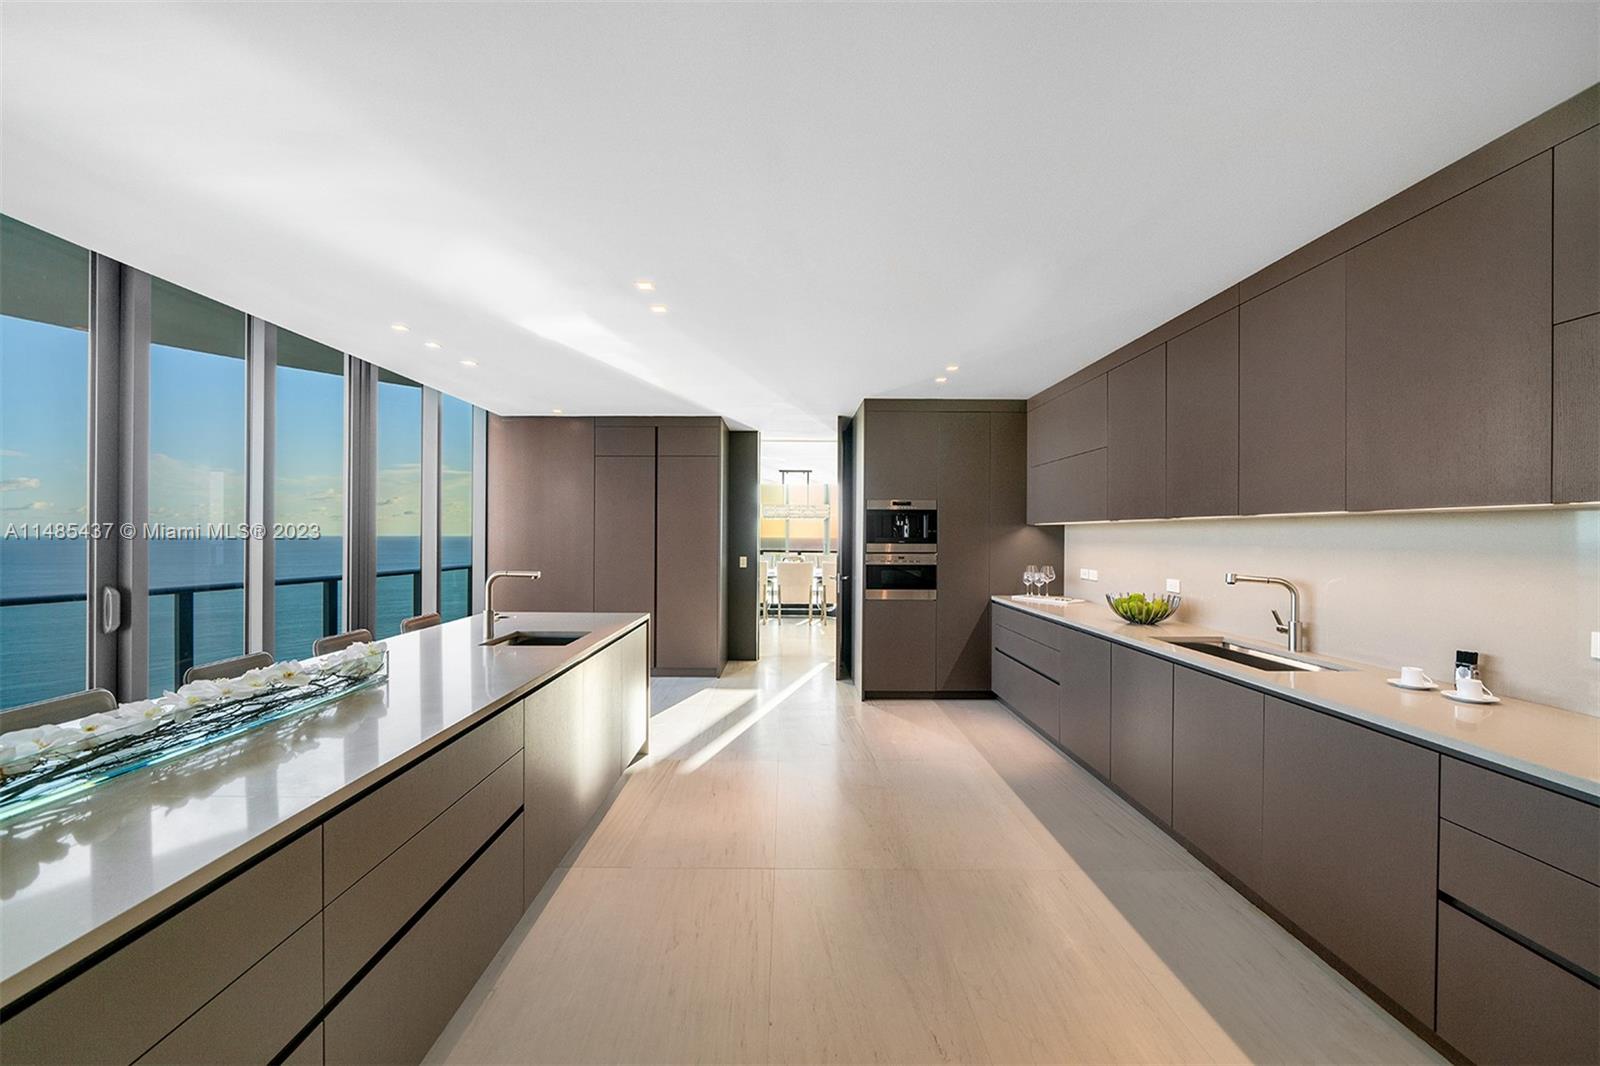 19575 Collins Ave Unit PH-43, Sunny Isles Beach, Florida, 33160, United States, 6 Bedrooms Bedrooms, ,8 BathroomsBathrooms,Residential,For Sale,19575 Collins Ave Unit PH-43,1401035